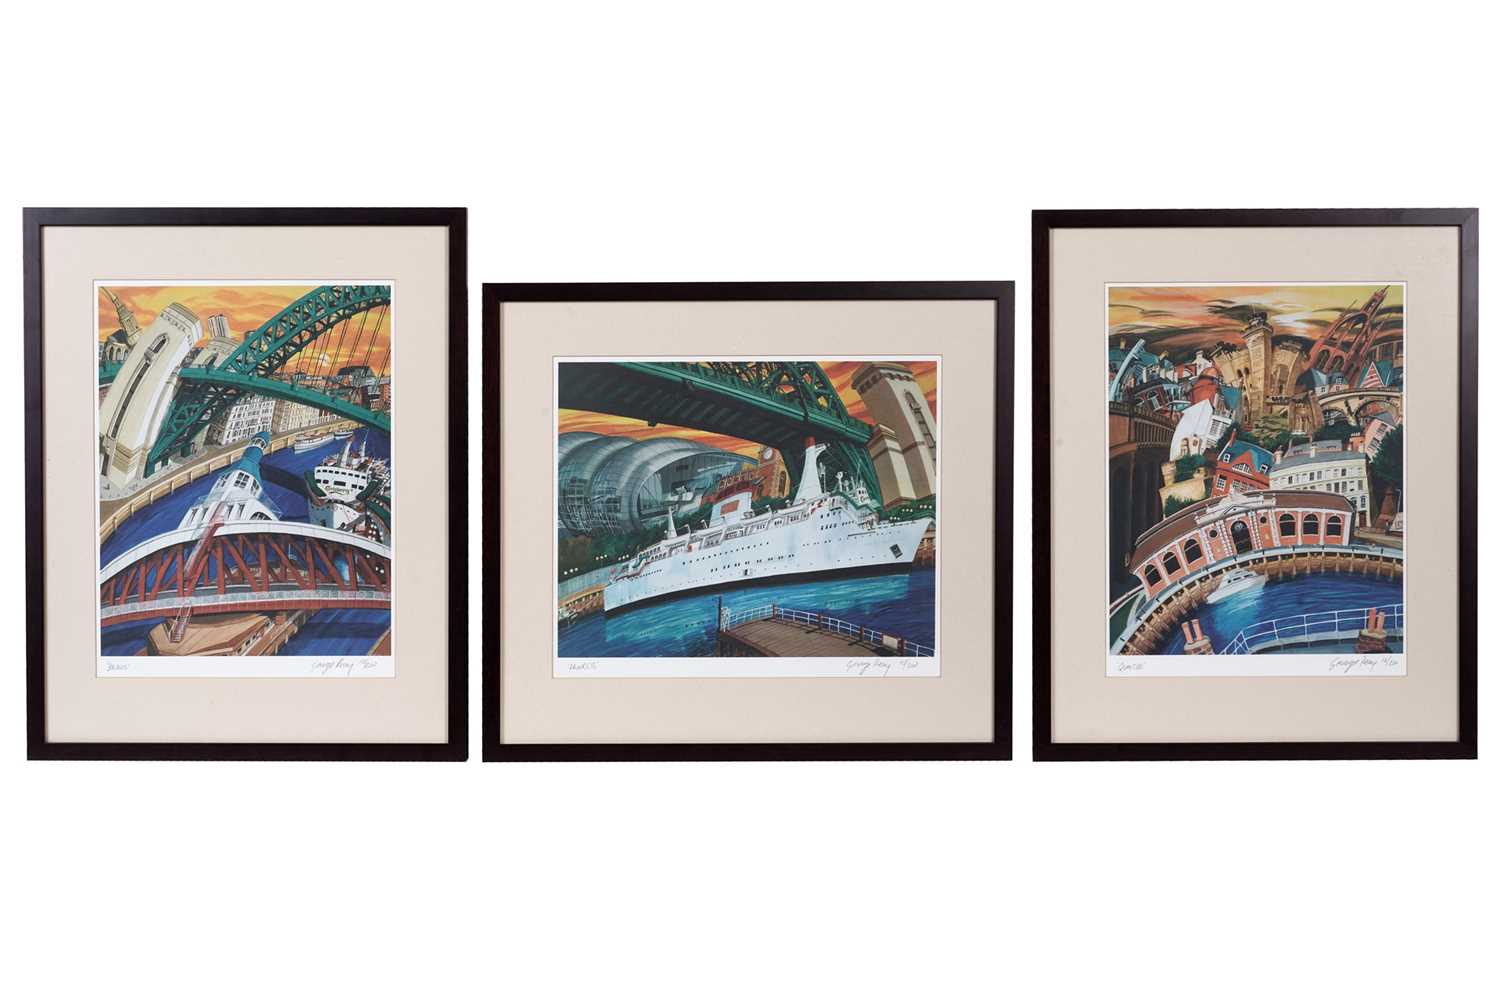 After George Reay - Bridges, Quayside, Princess: three views of Newcastle | limited edition prints